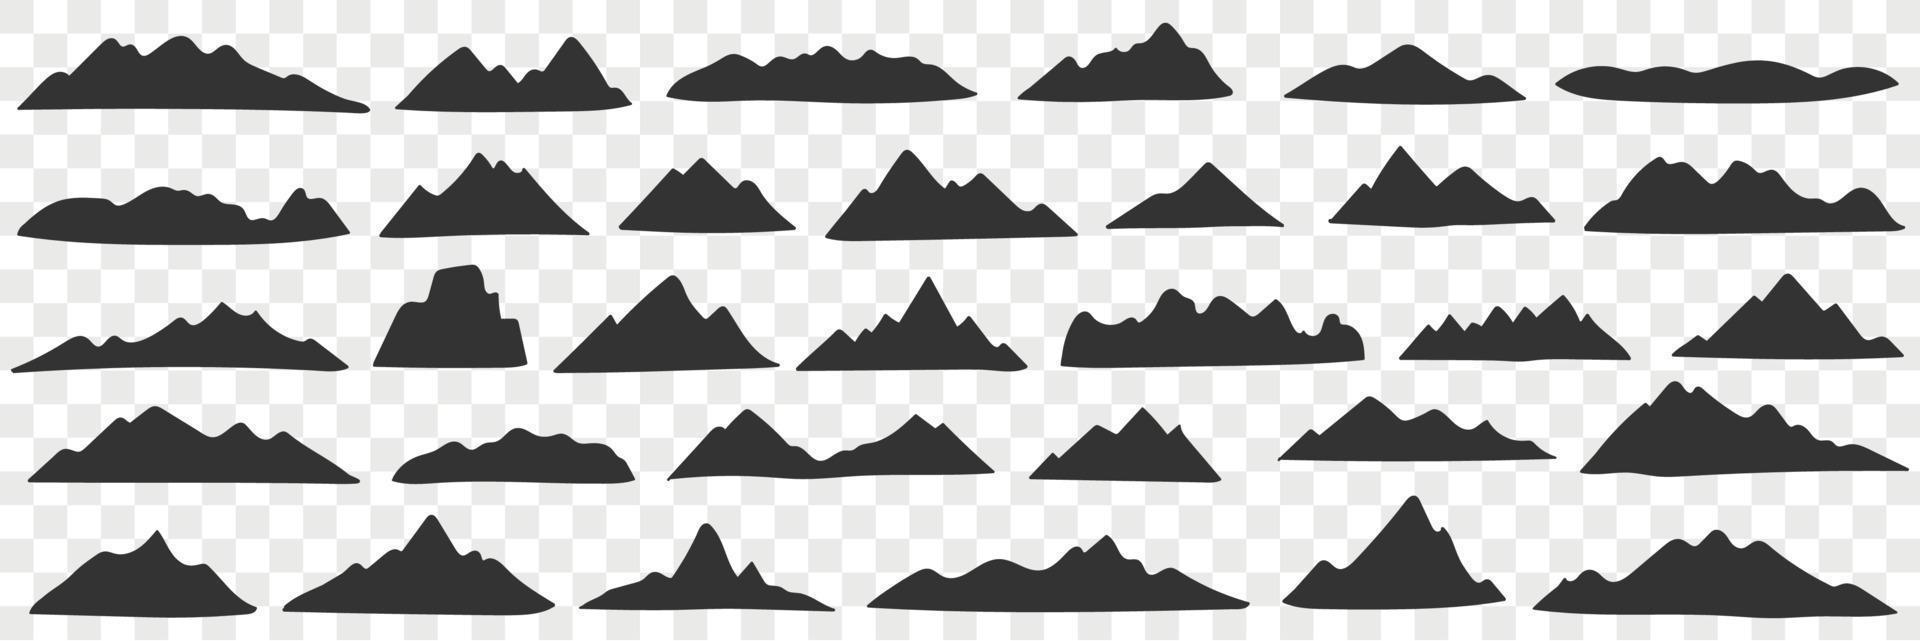 Mountains range silhouettes doodle set. Collection of hand drawn various black silhouettes of natural hills mountains in rows isolated on transparent background vector